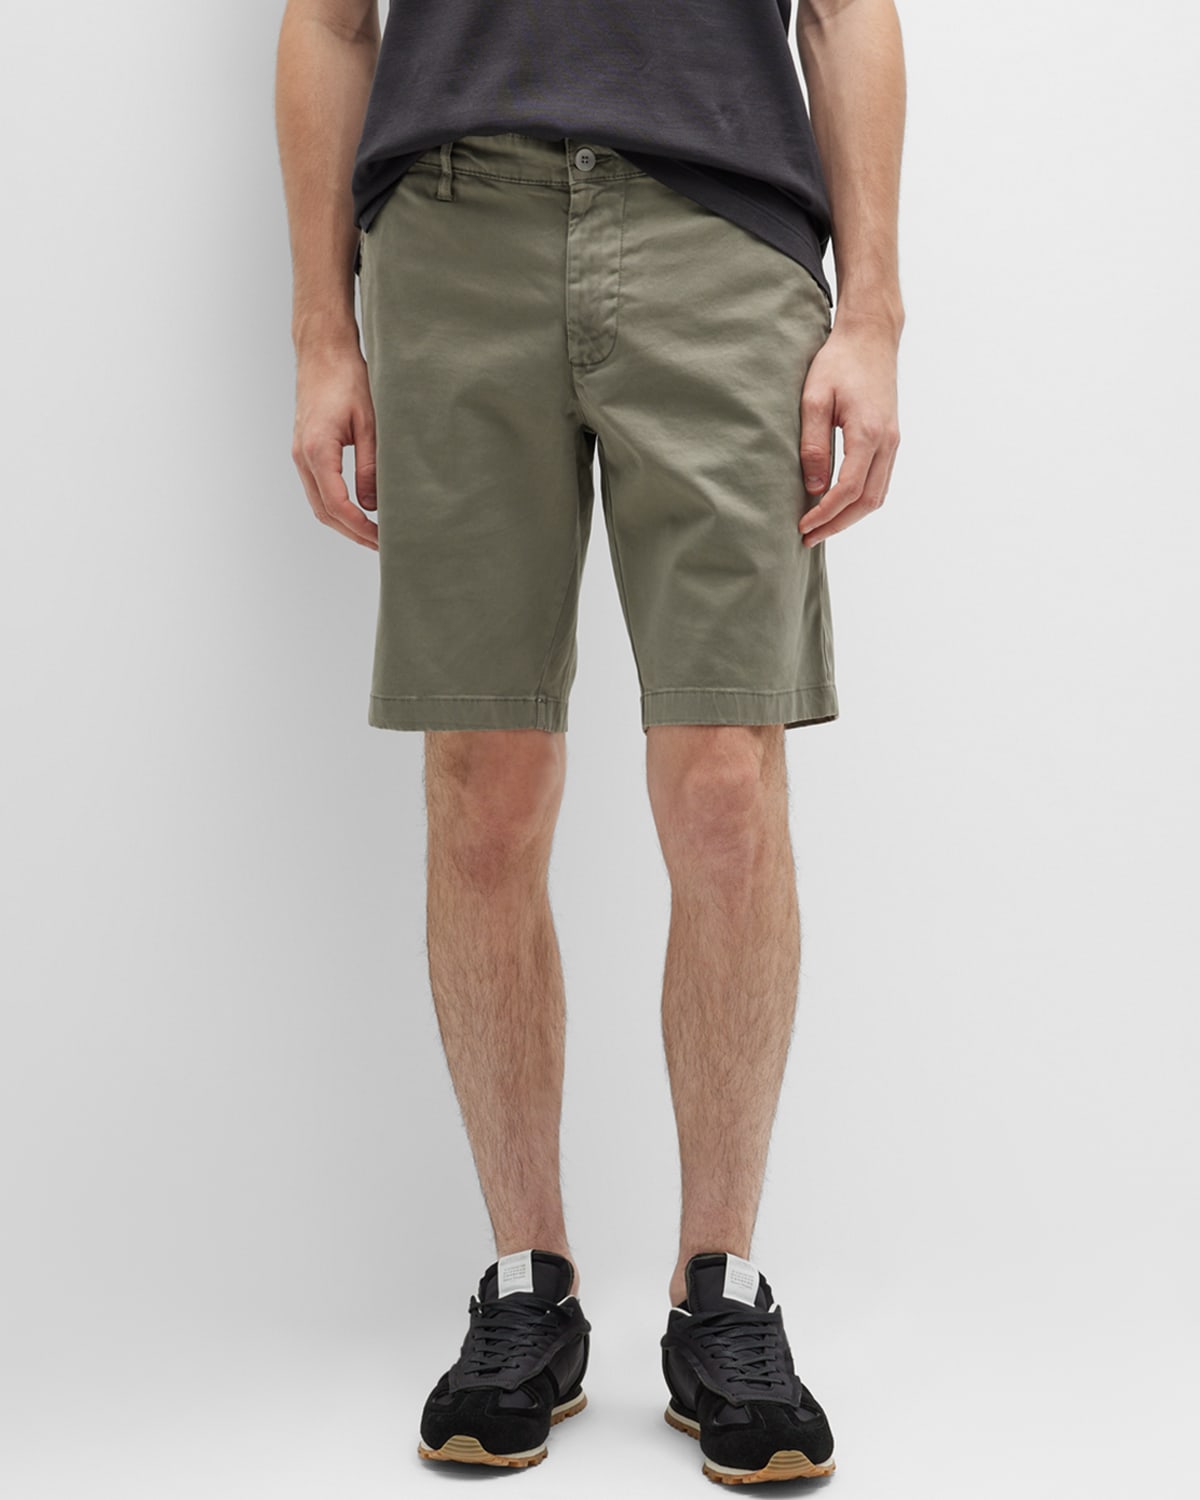 AG Adriano Goldschmied Men's Griffin Solid Shorts